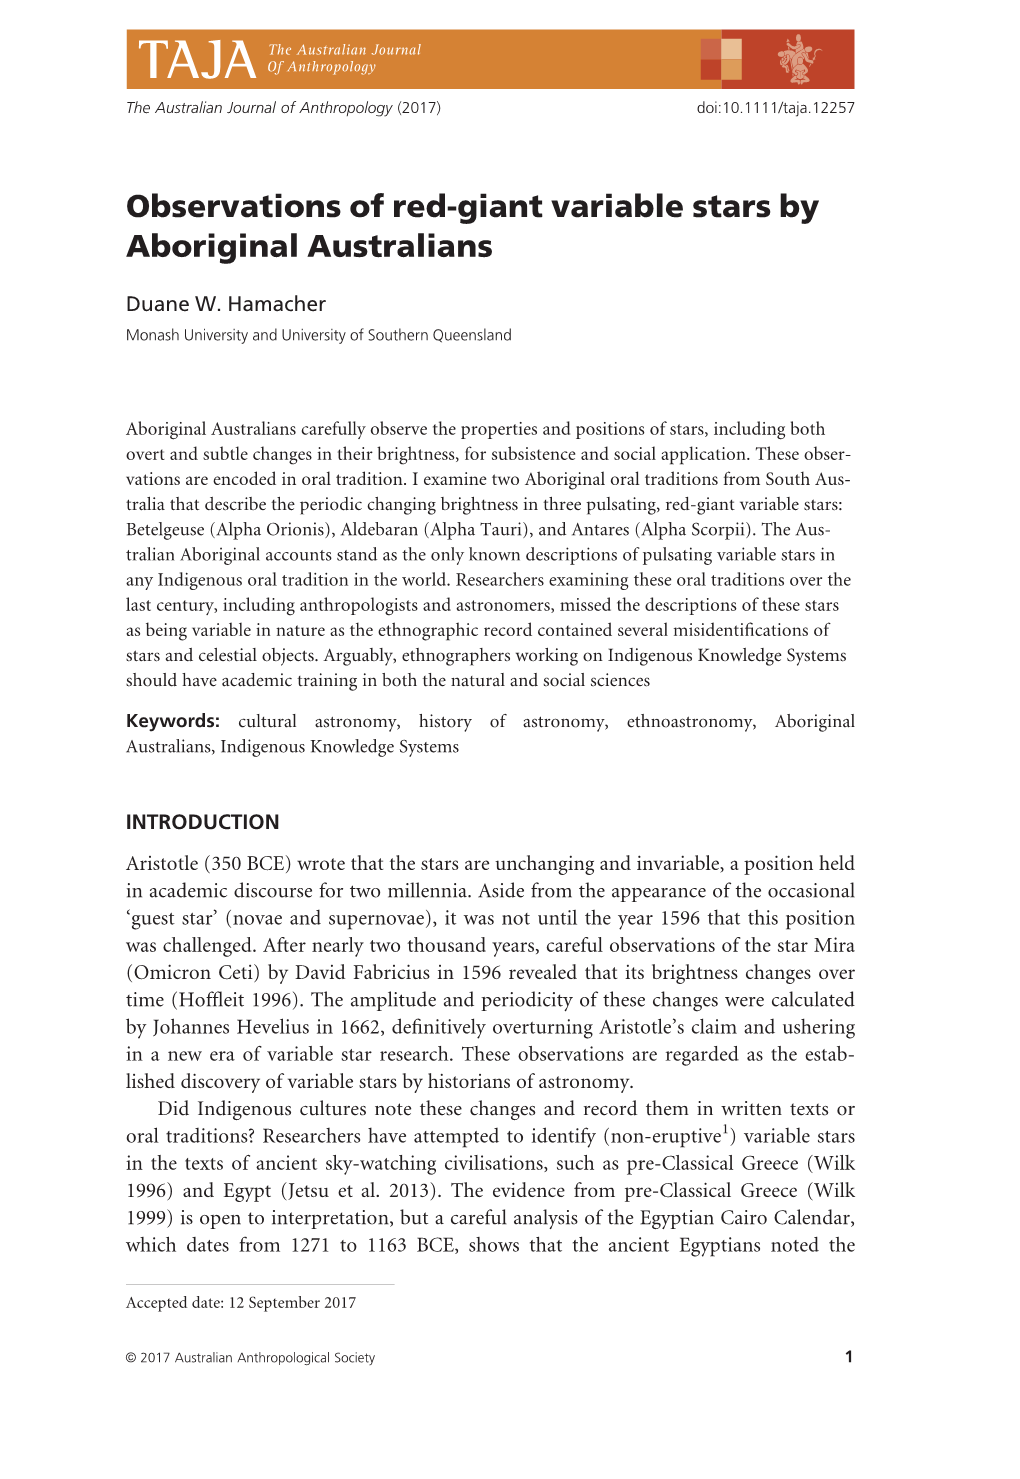 Observations of Red-Giant Variable Stars by Aboriginal Australians